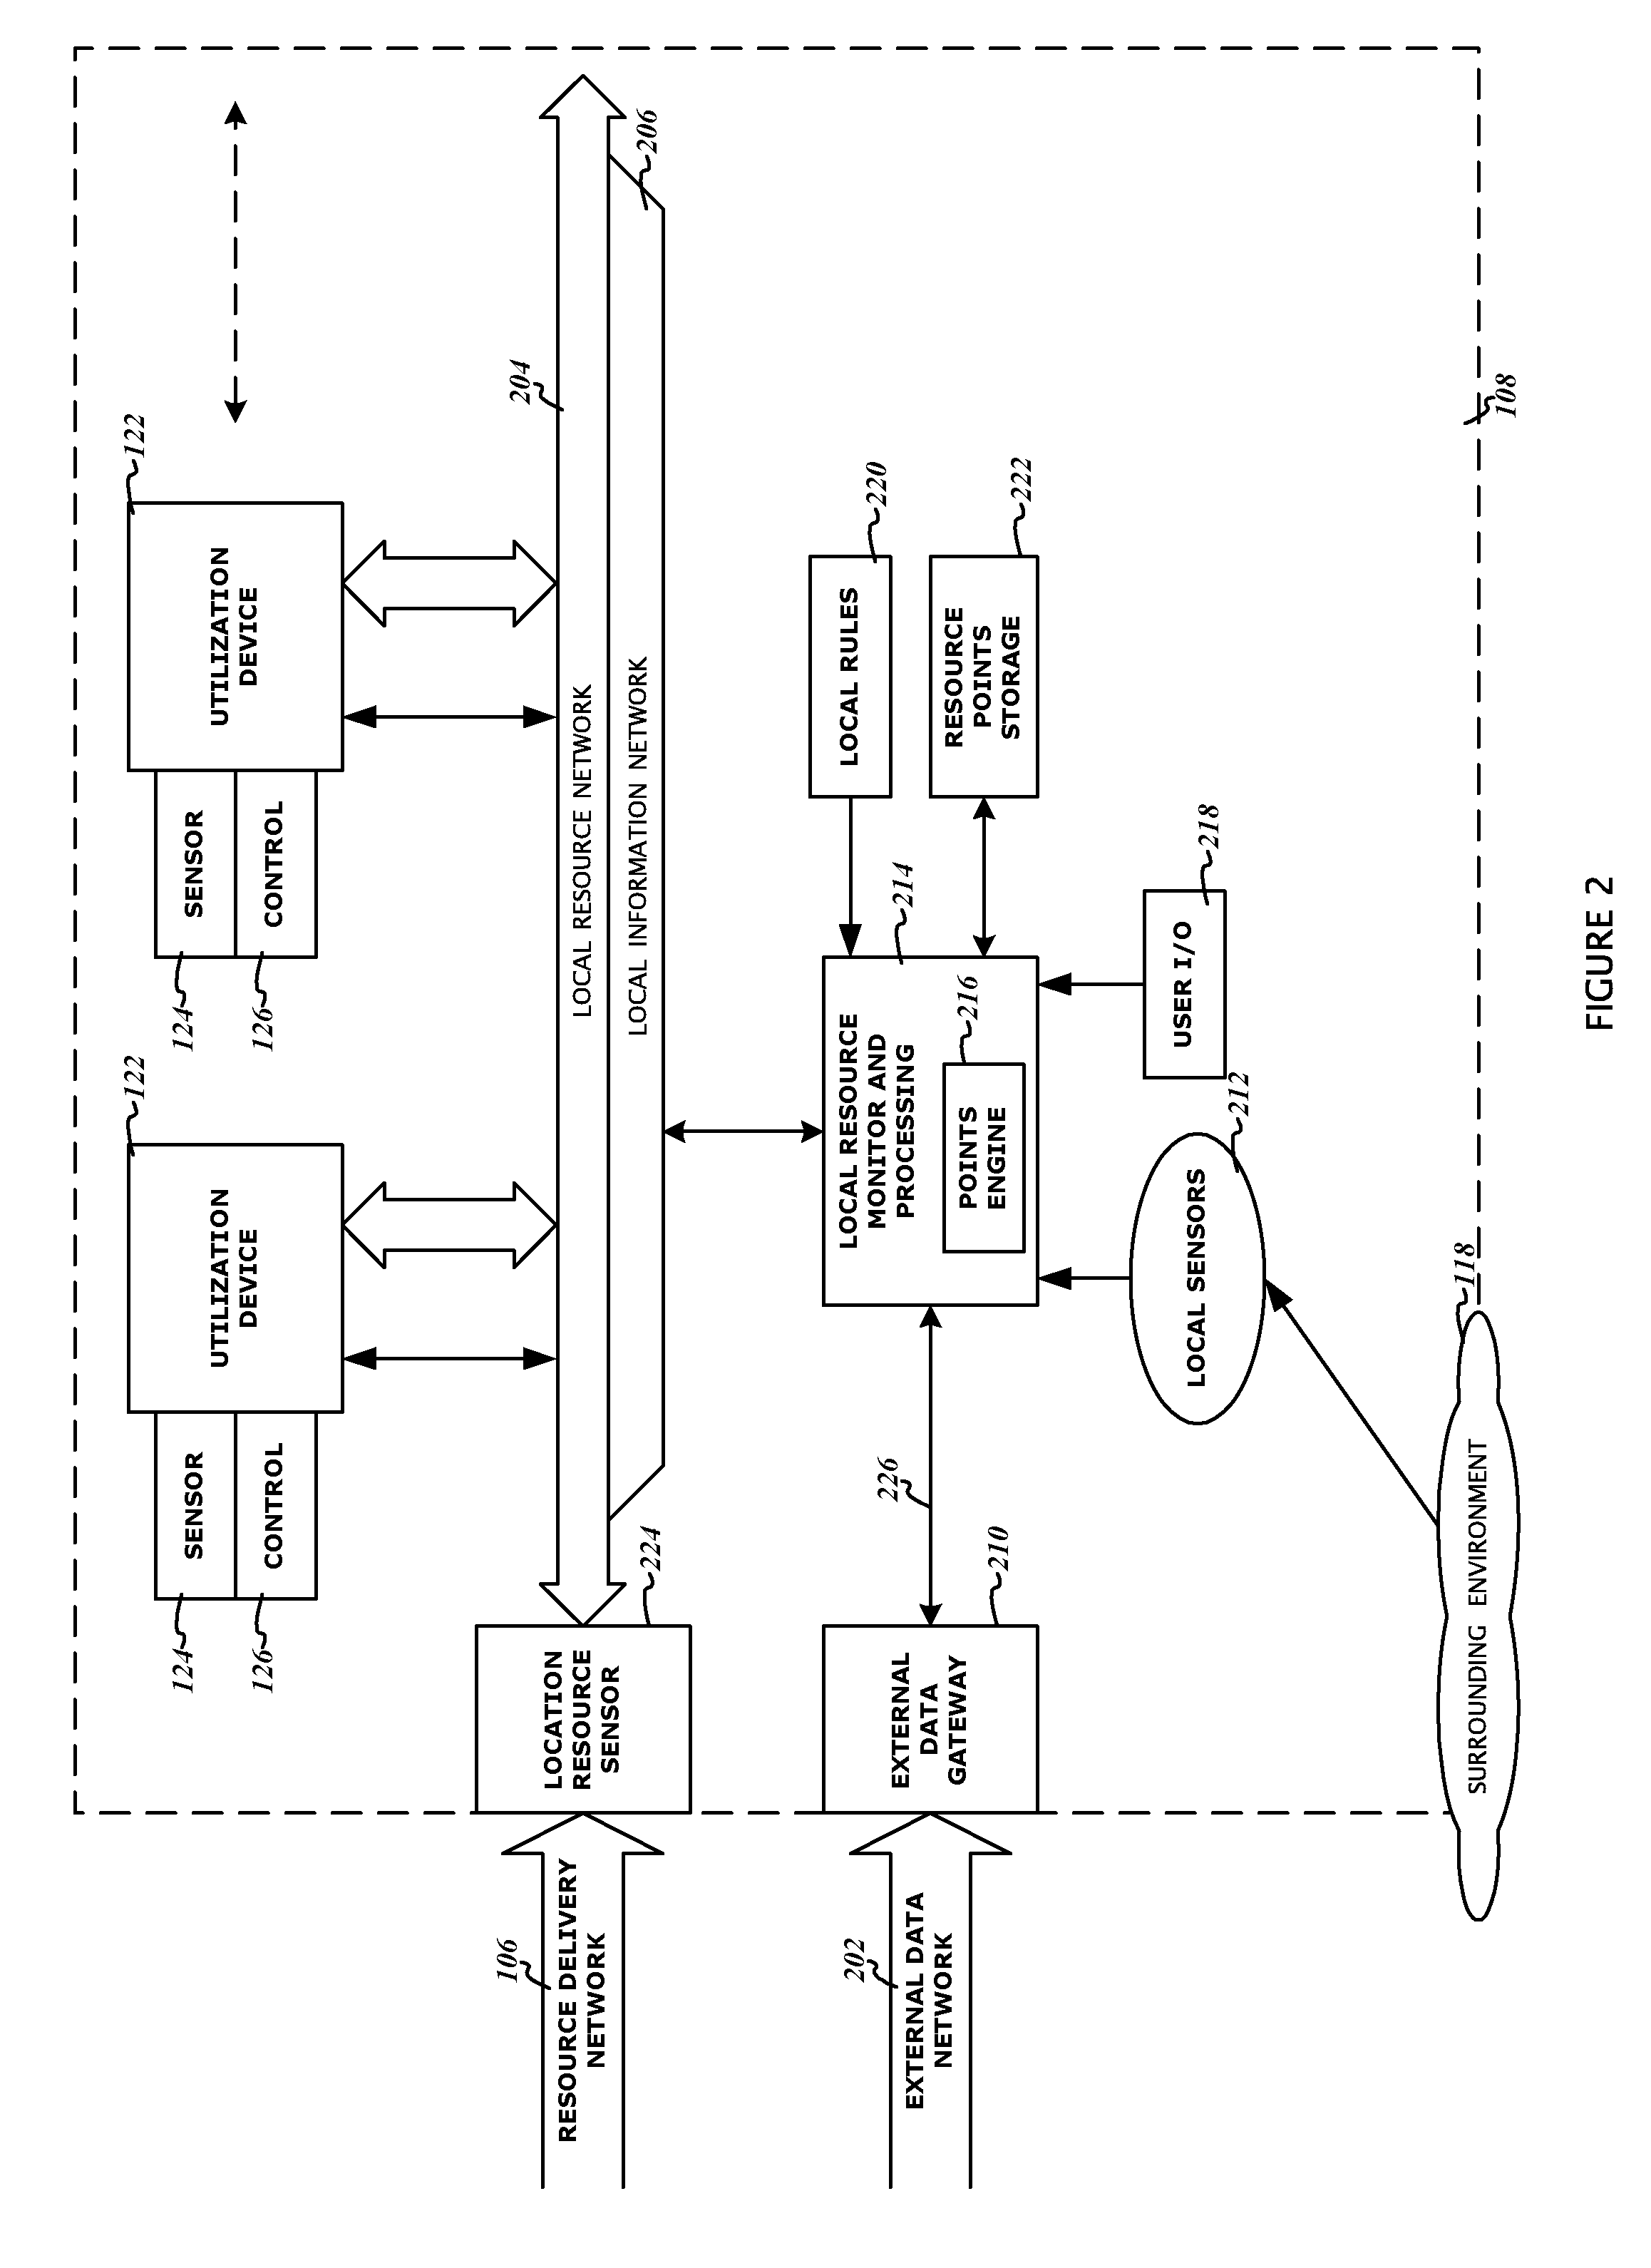 Method and system for the more efficient utilization and conservation of energy and water resources